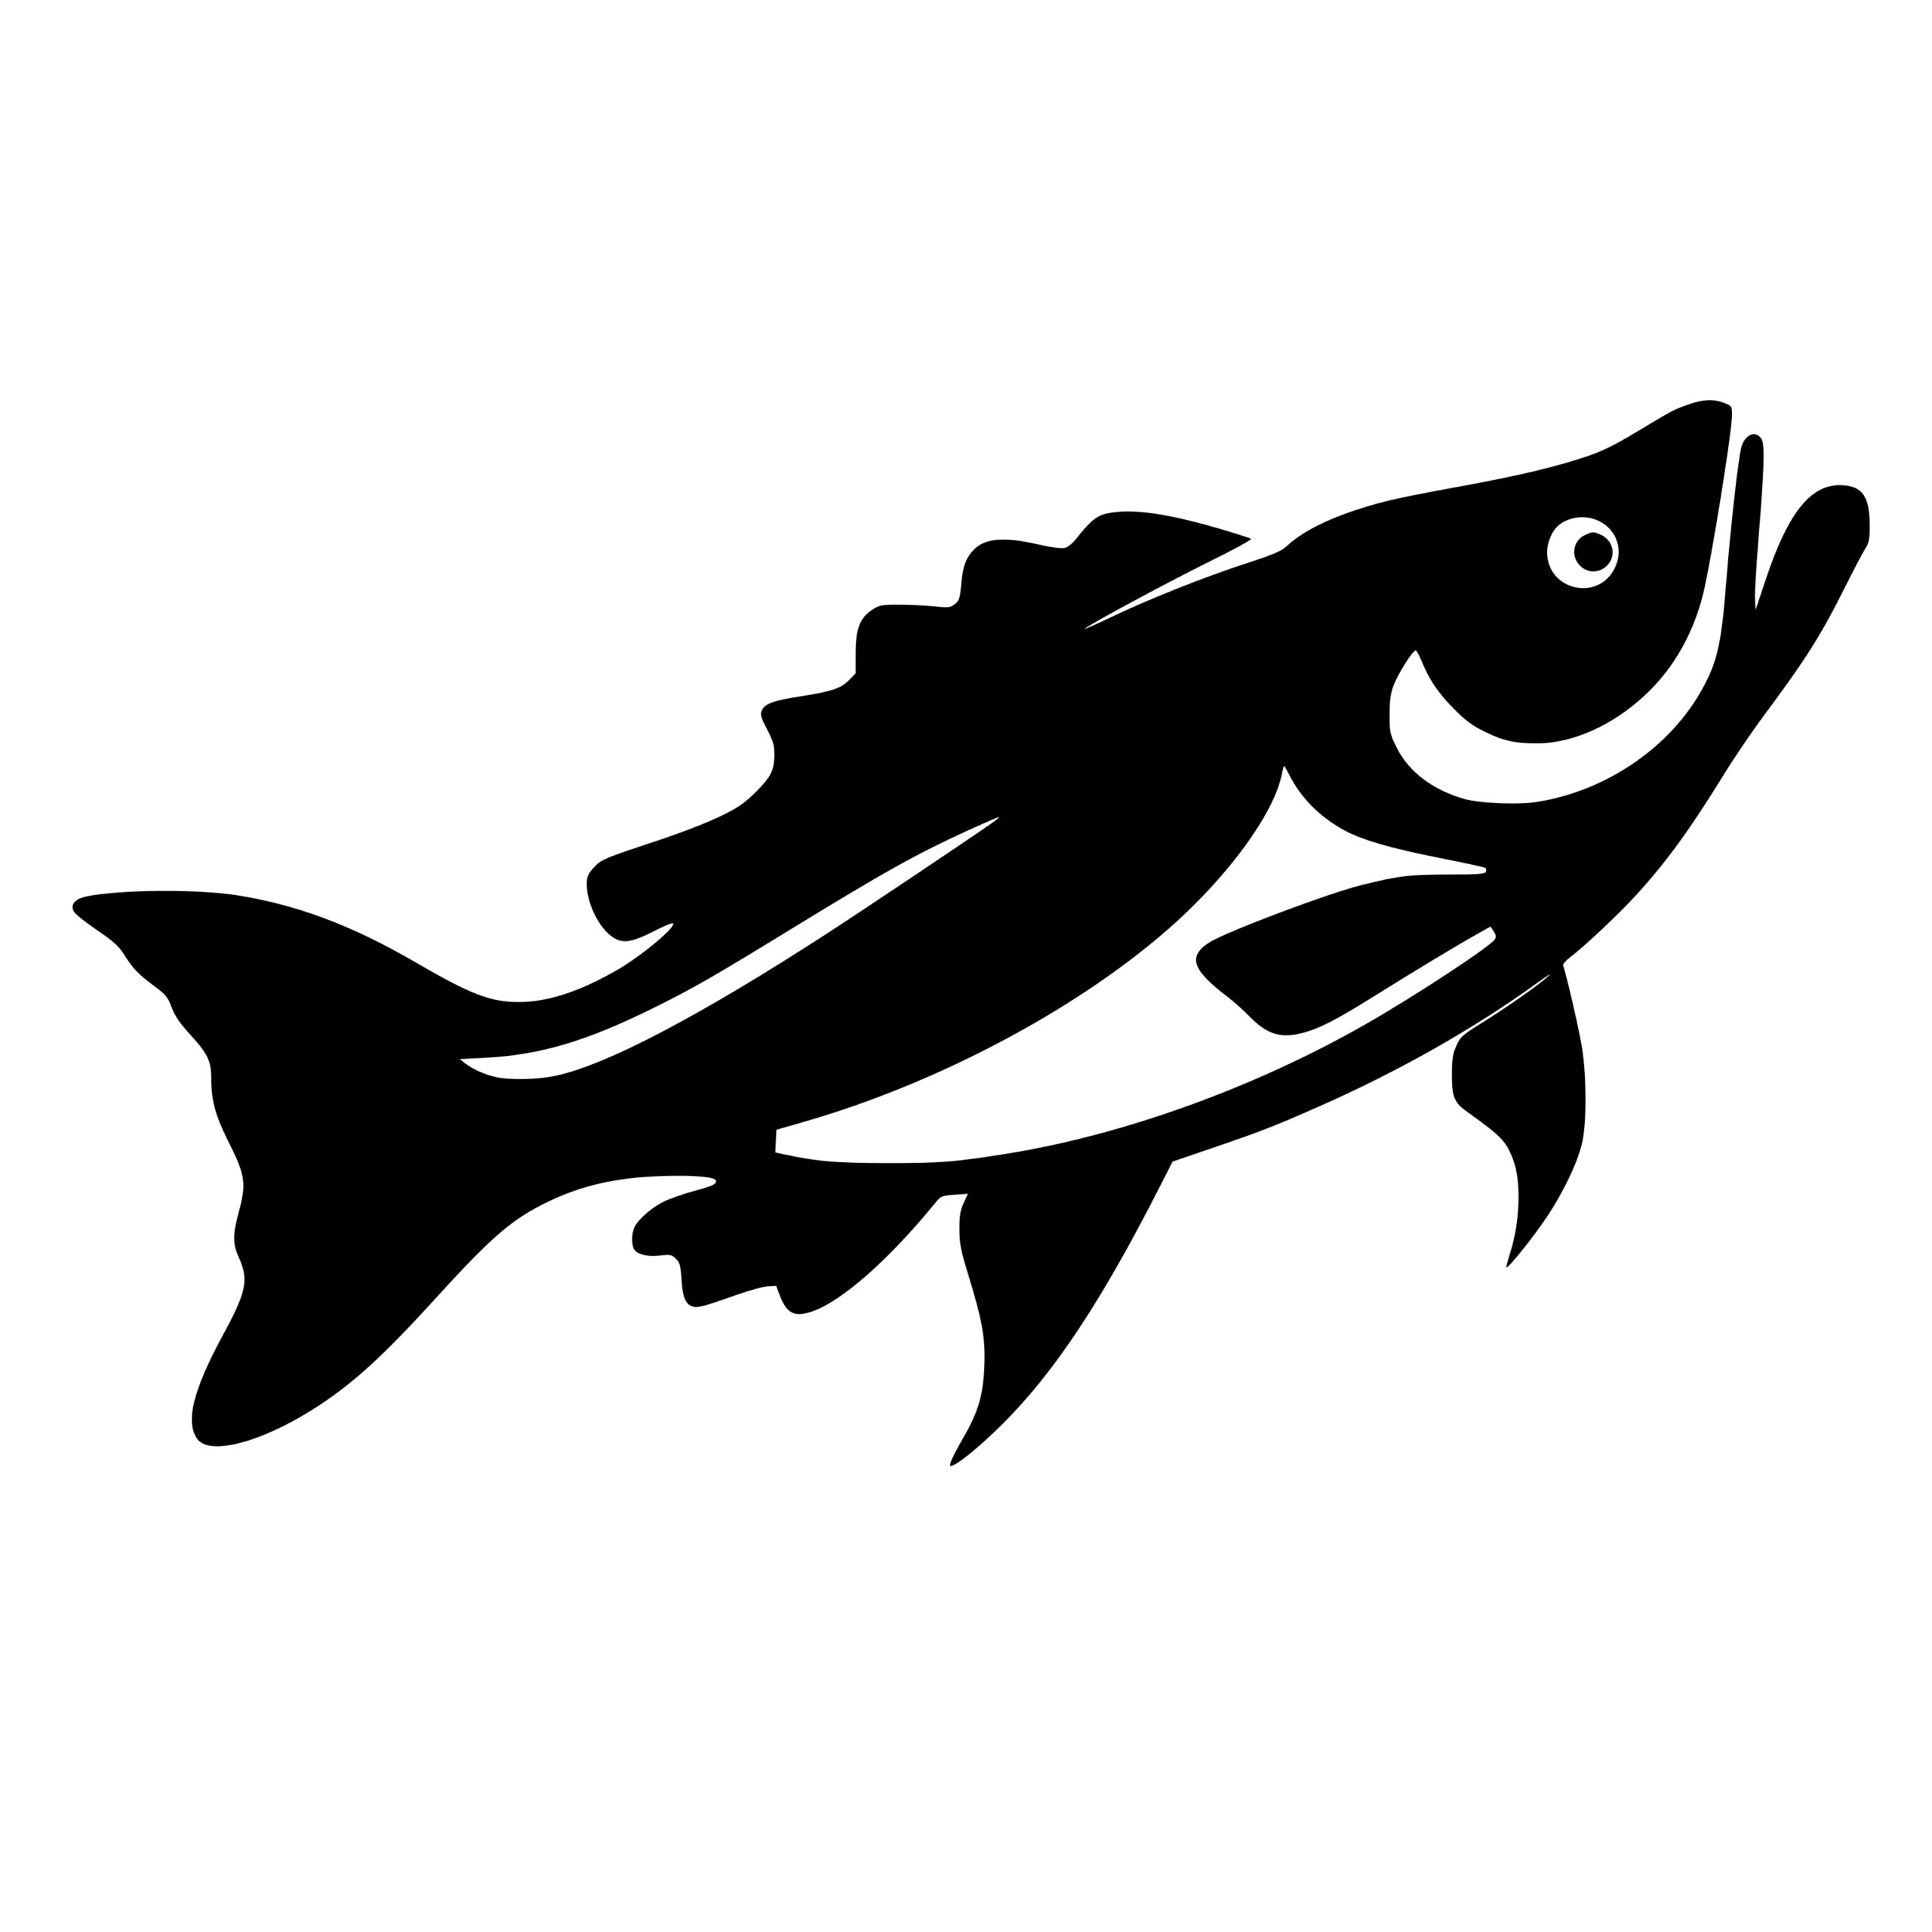 Walleye Fish SVG File: Instant Download for Cricut, Silhouette, Laser